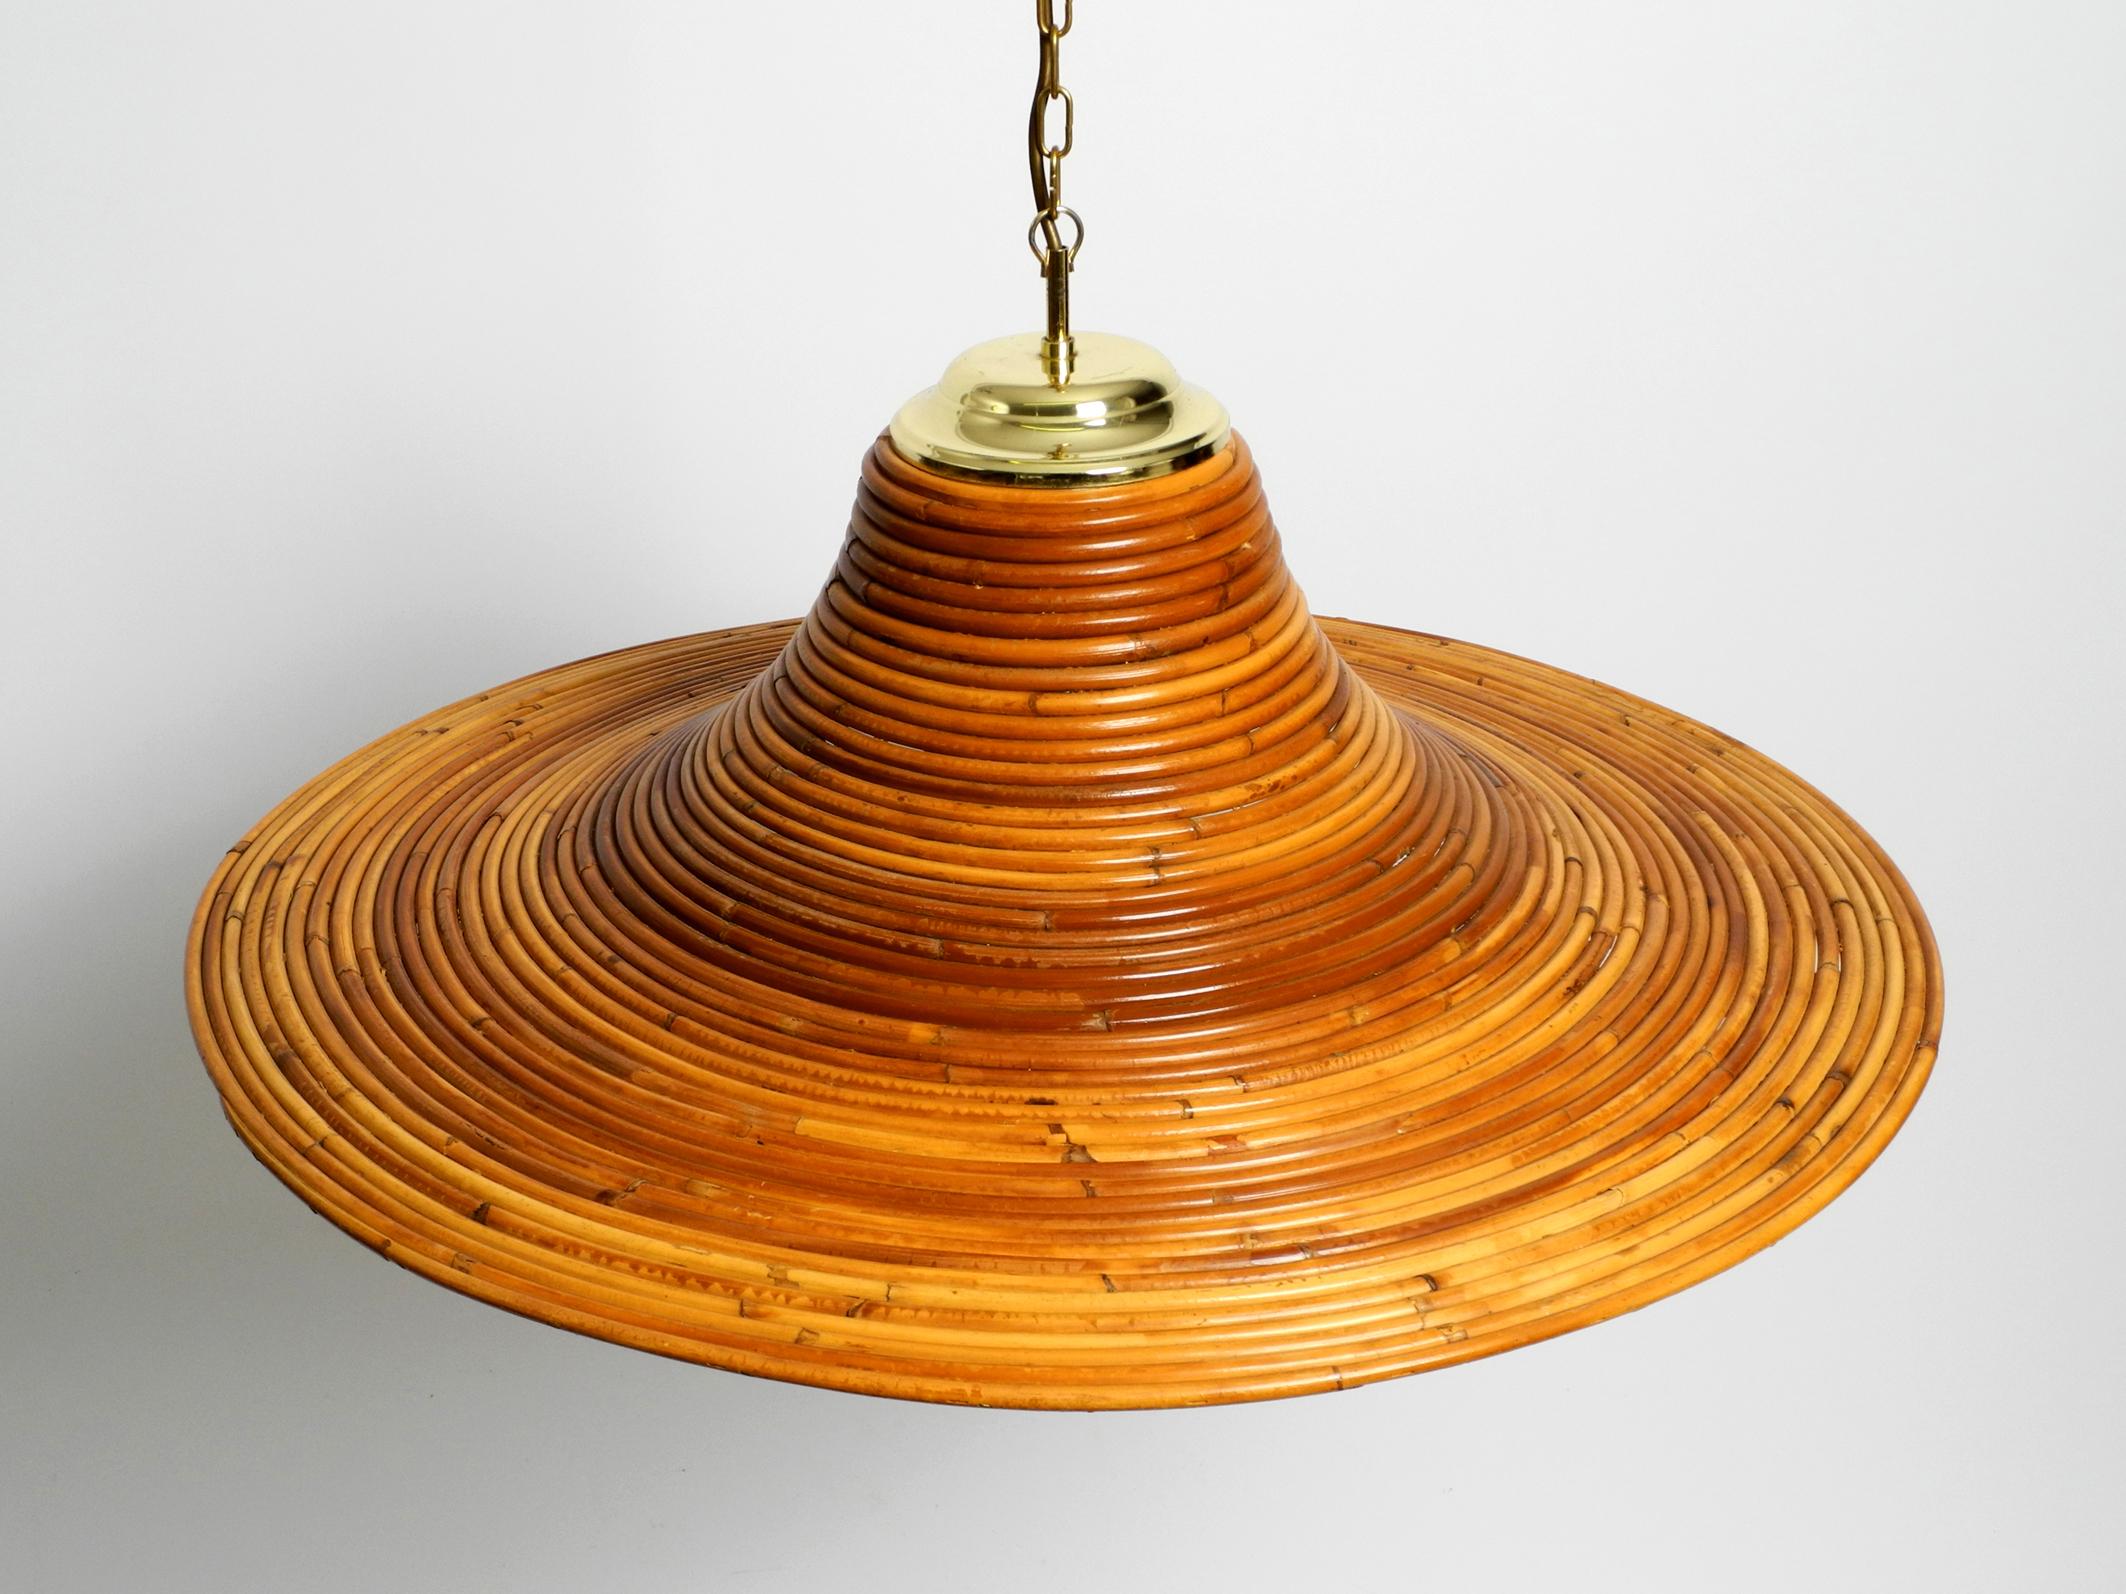 Beautiful huge round 1970s bamboo wood ceiling pendant lamp. Made in Italy. In the style of Vivai del Sud.
Great Italian design with a gigantic 75 cm shade diameter.
Creates a very warm indirect light.
In very good, well-kept vintage condition. The